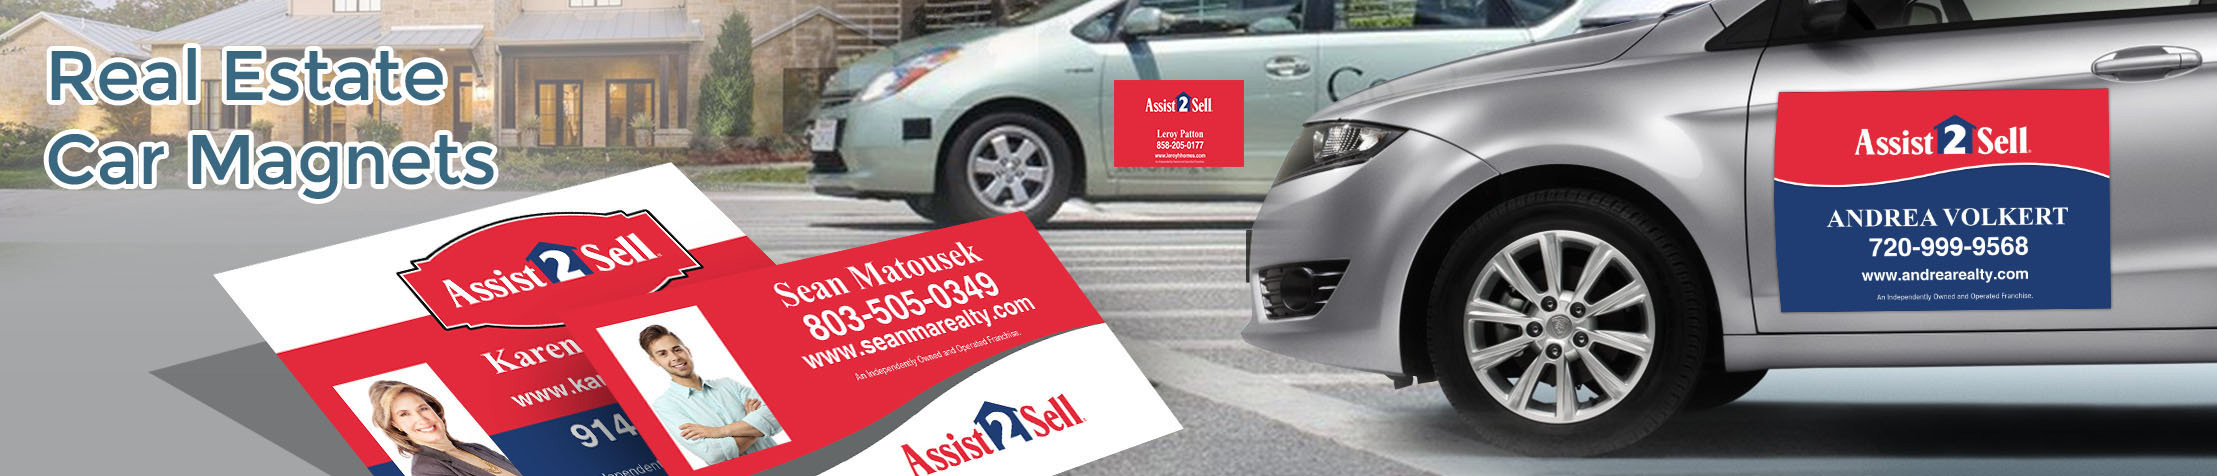 Assit2Sell Real Estate  Car Magnets - Assit2Sell Real Estate custom car magnets for realtors, with or without photo | BestPrintBuy.com